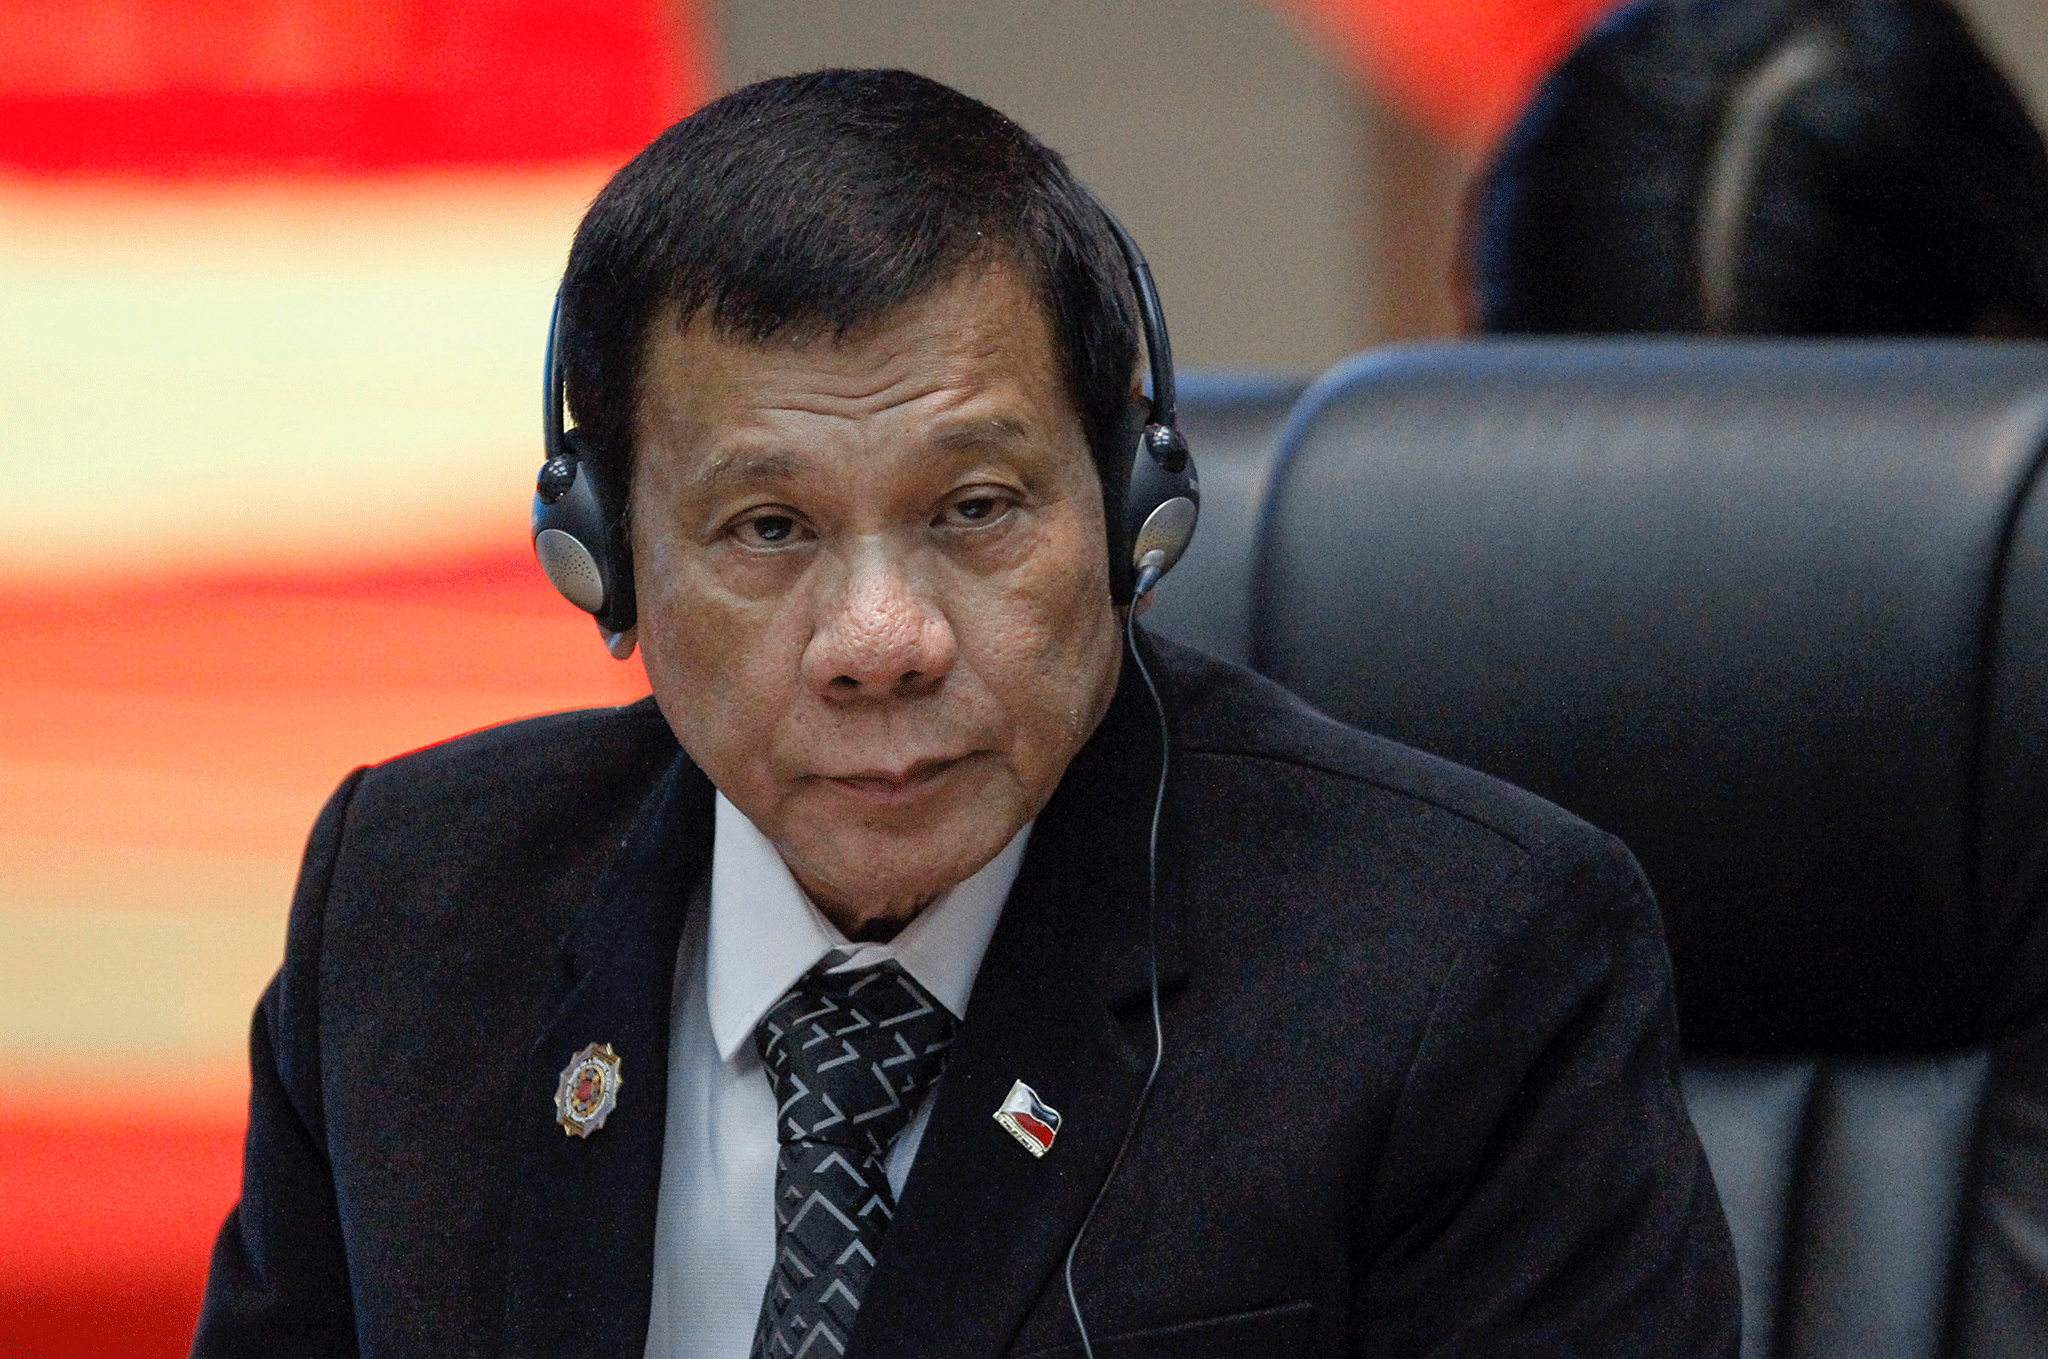 Duterte attends the ASEAN Summit in Vientiane, Laos where he was due to meet President Barack Obama